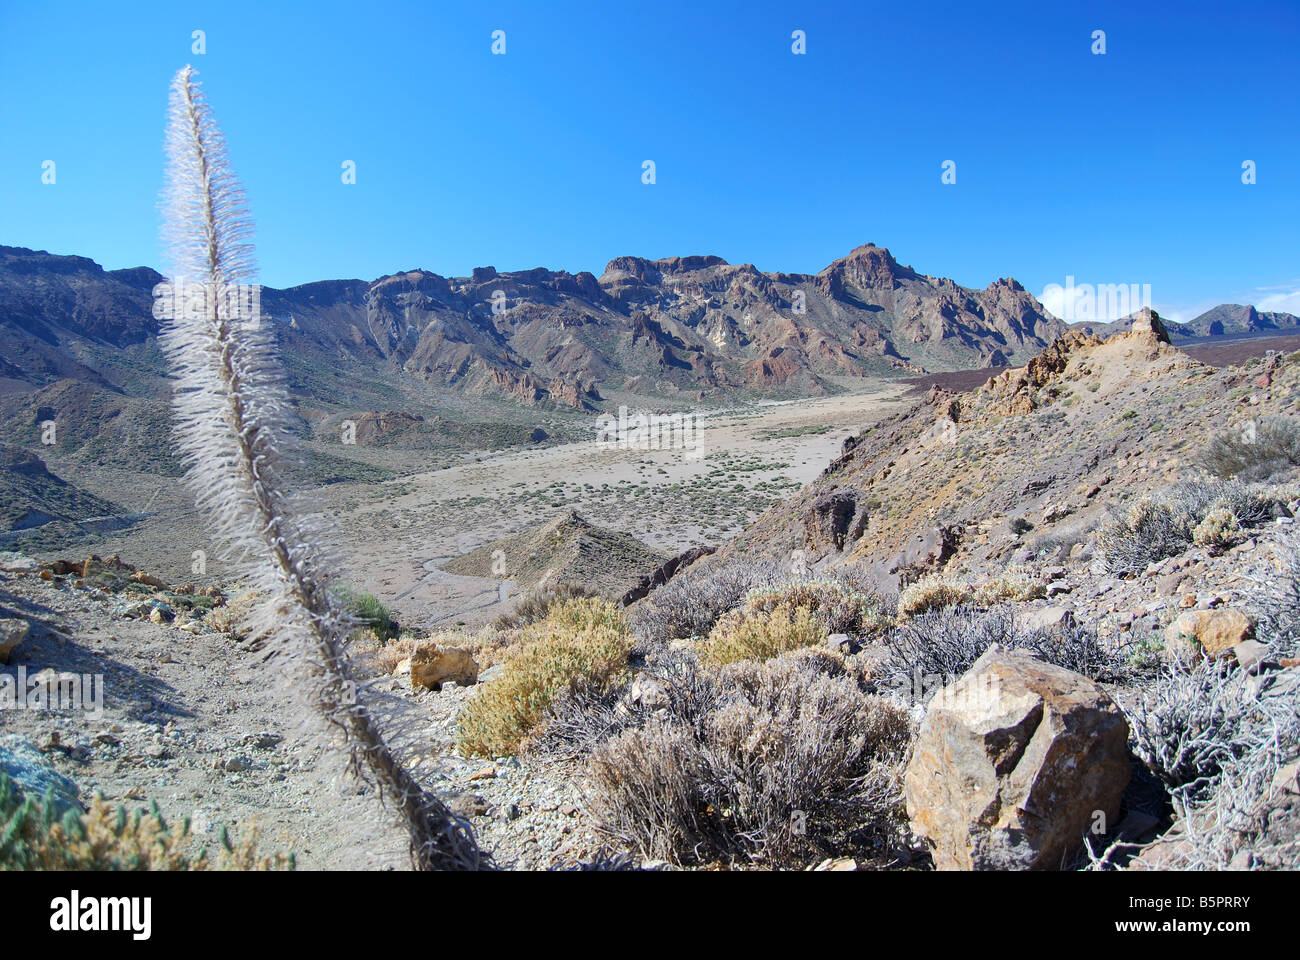 View of lava valley and Los Roques, Parque Nacional Del Teide, Tenerife, Canary Islands, Spain Stock Photo